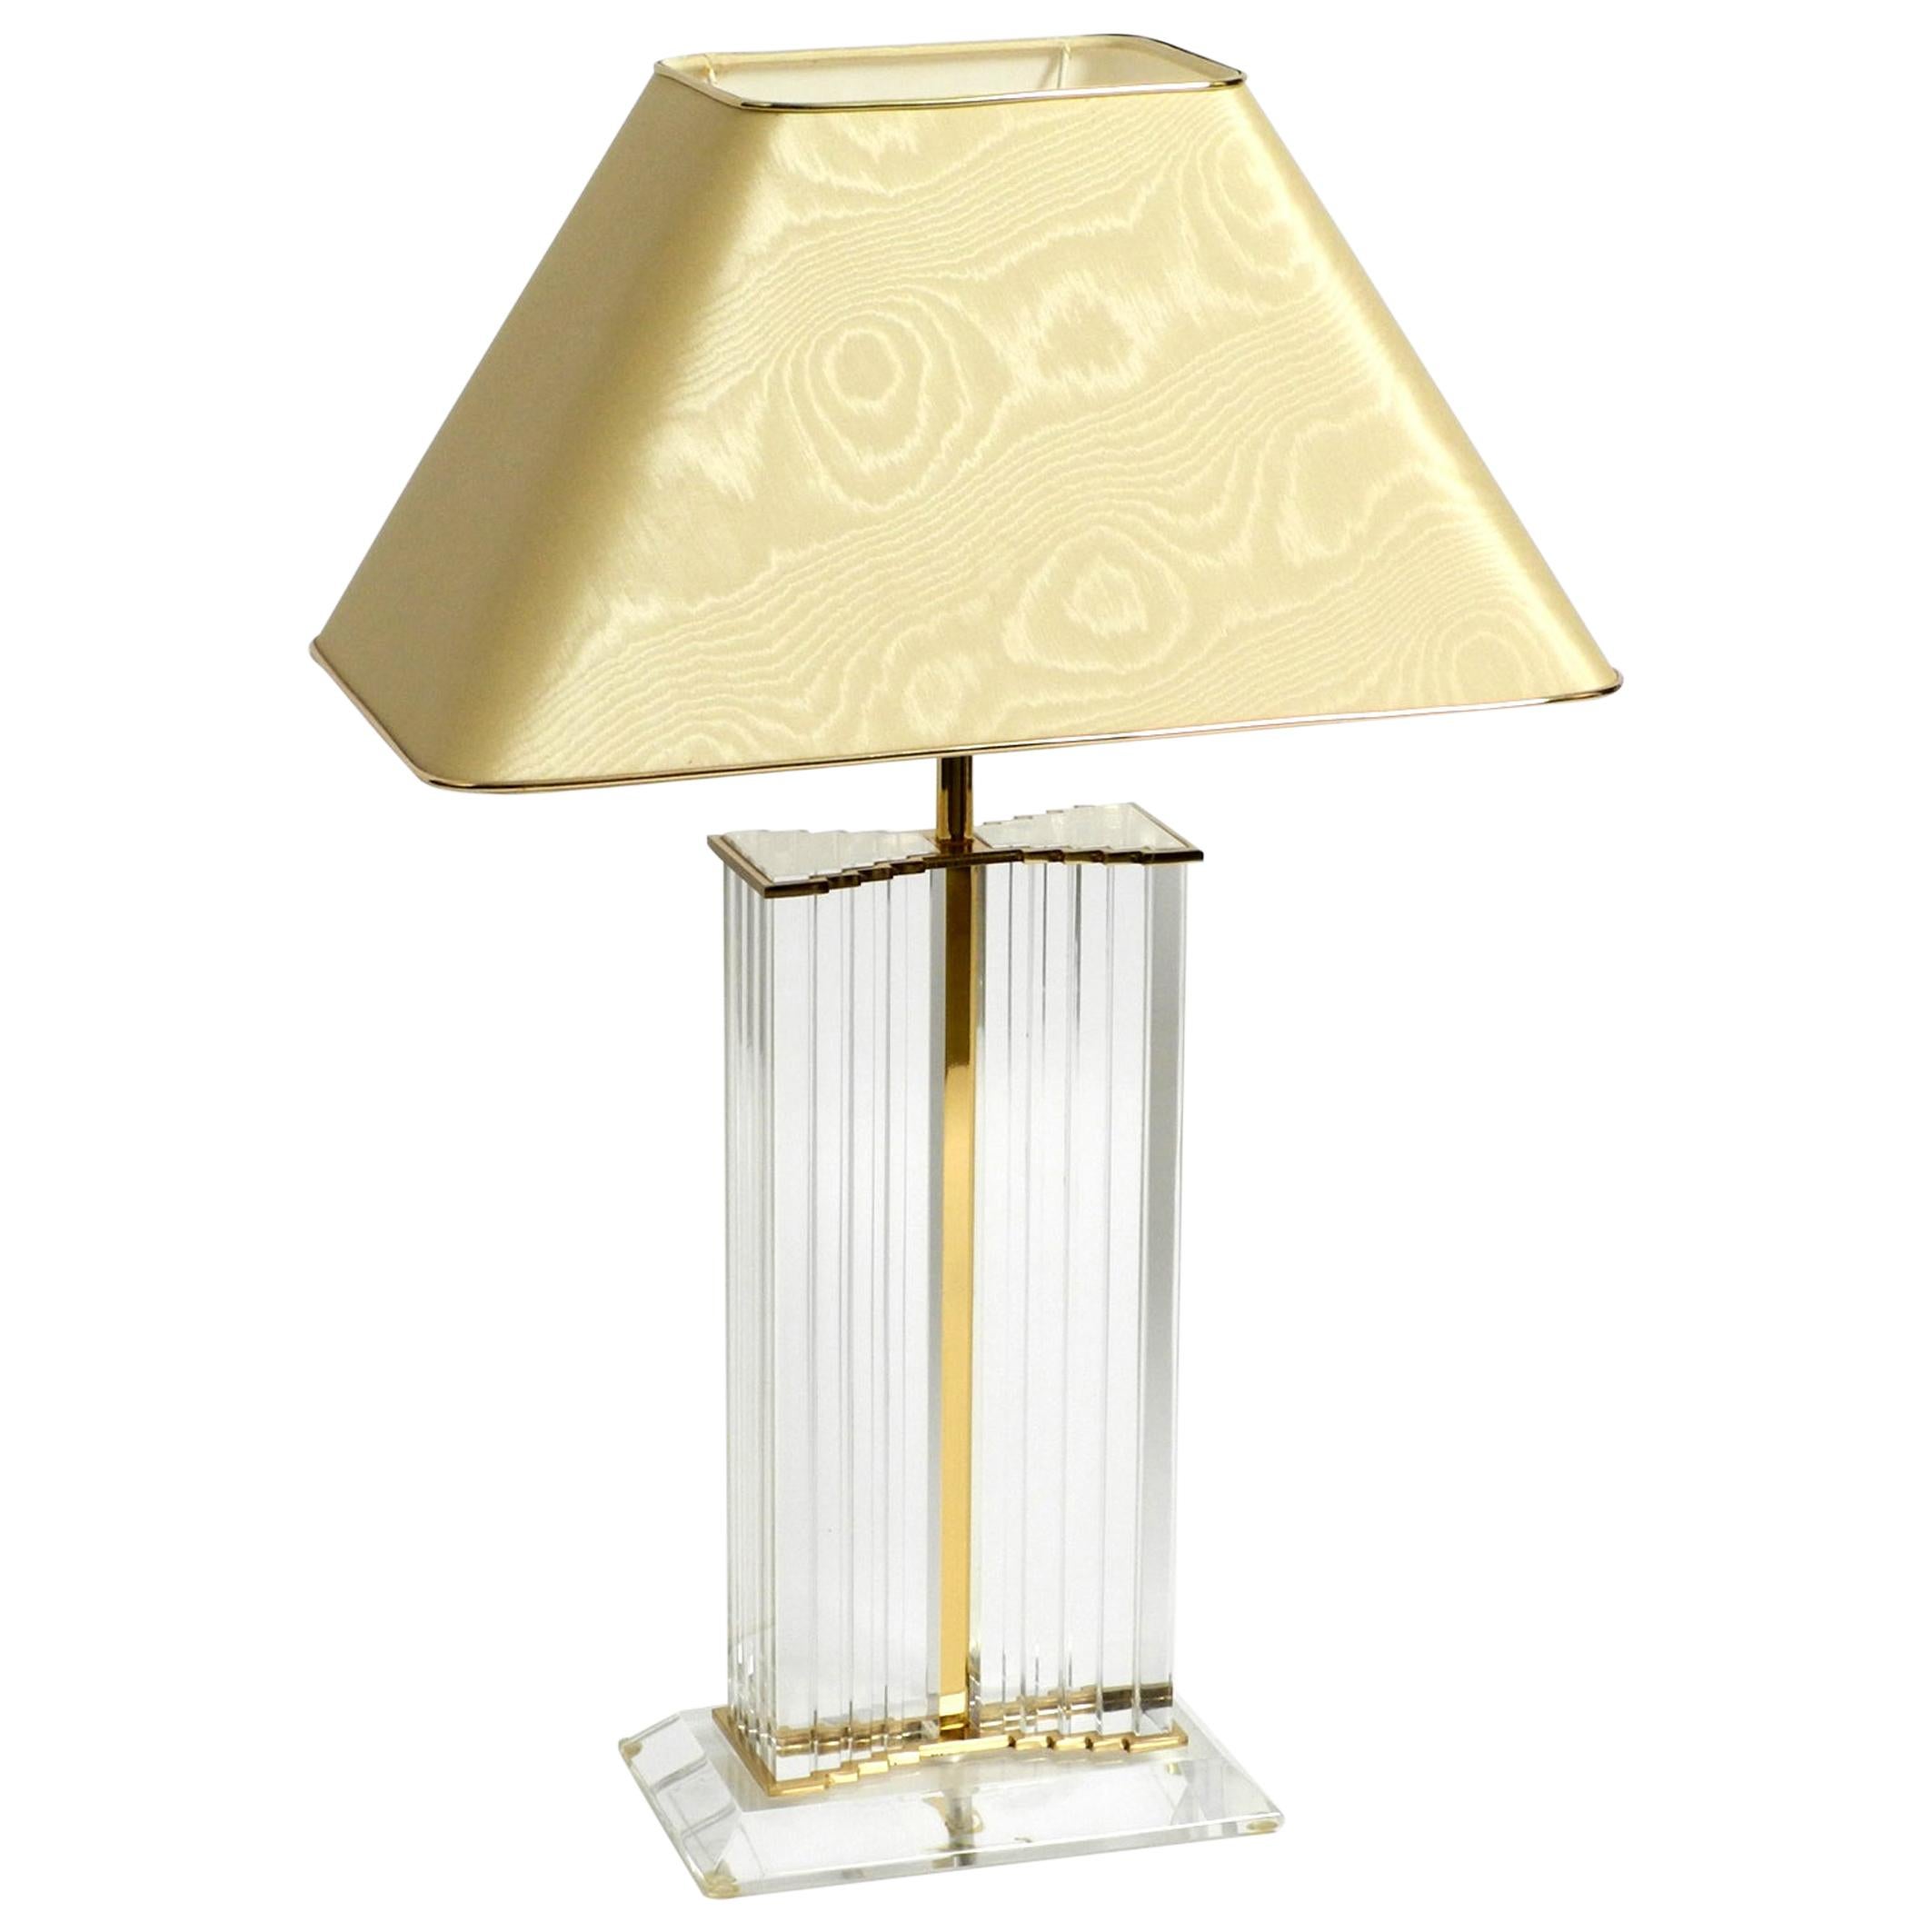 Very Rare Elegant Large Plexiglass Table Lamp from the 1970s with Silk Shade